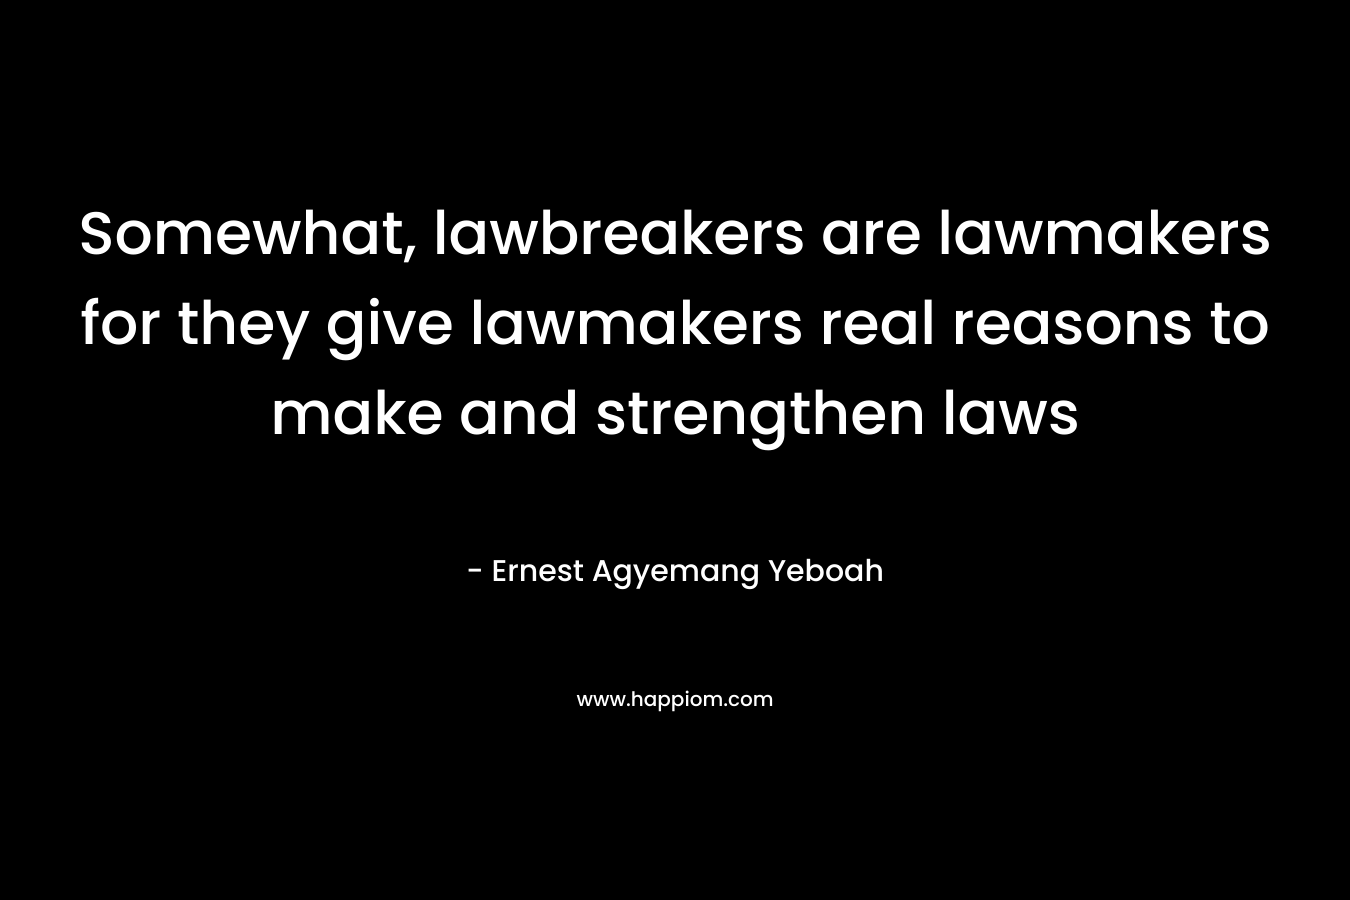 Somewhat, lawbreakers are lawmakers for they give lawmakers real reasons to make and strengthen laws – Ernest Agyemang Yeboah